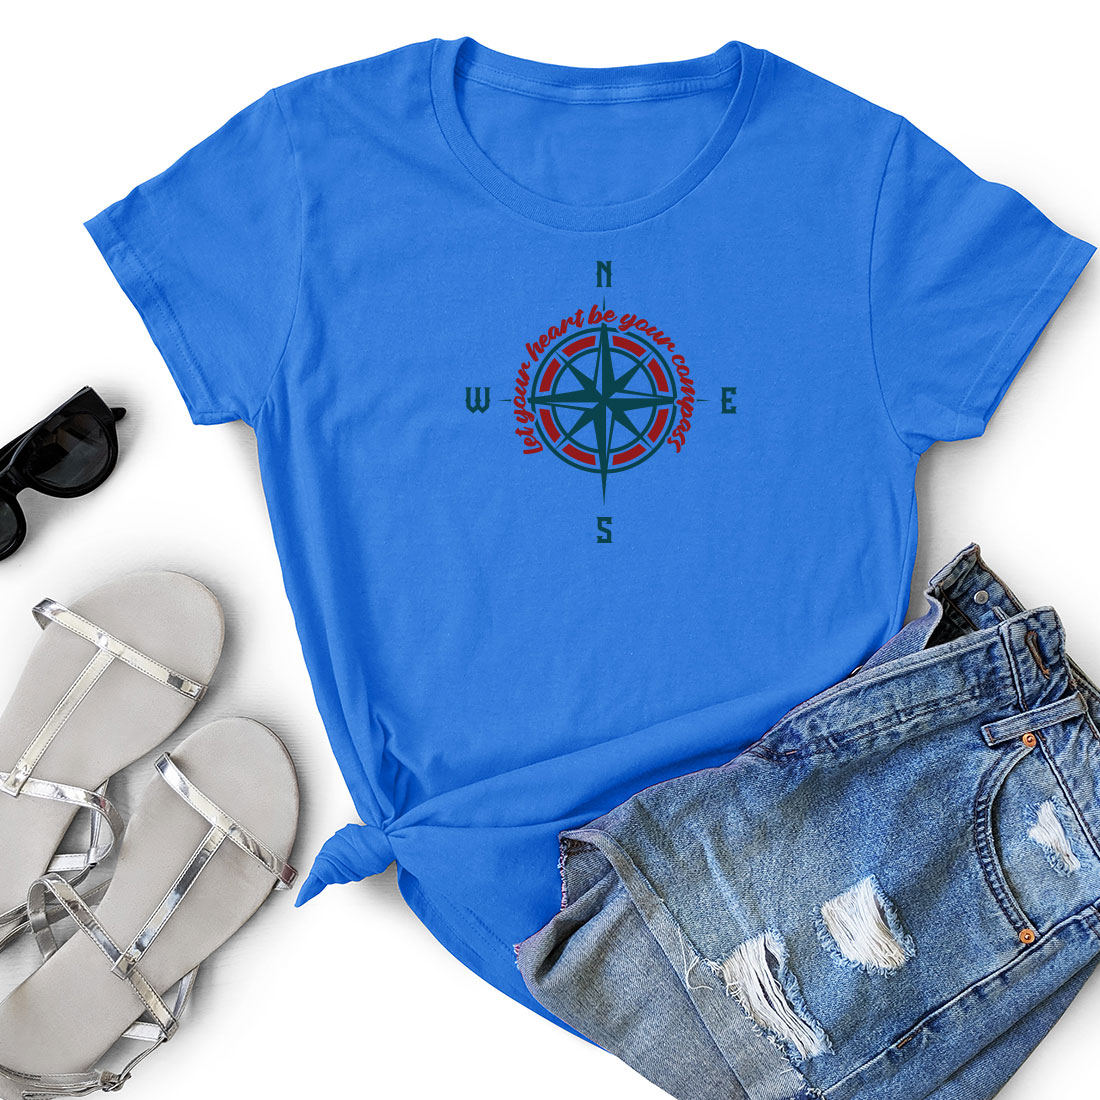 Blue shirt with a compass on it.